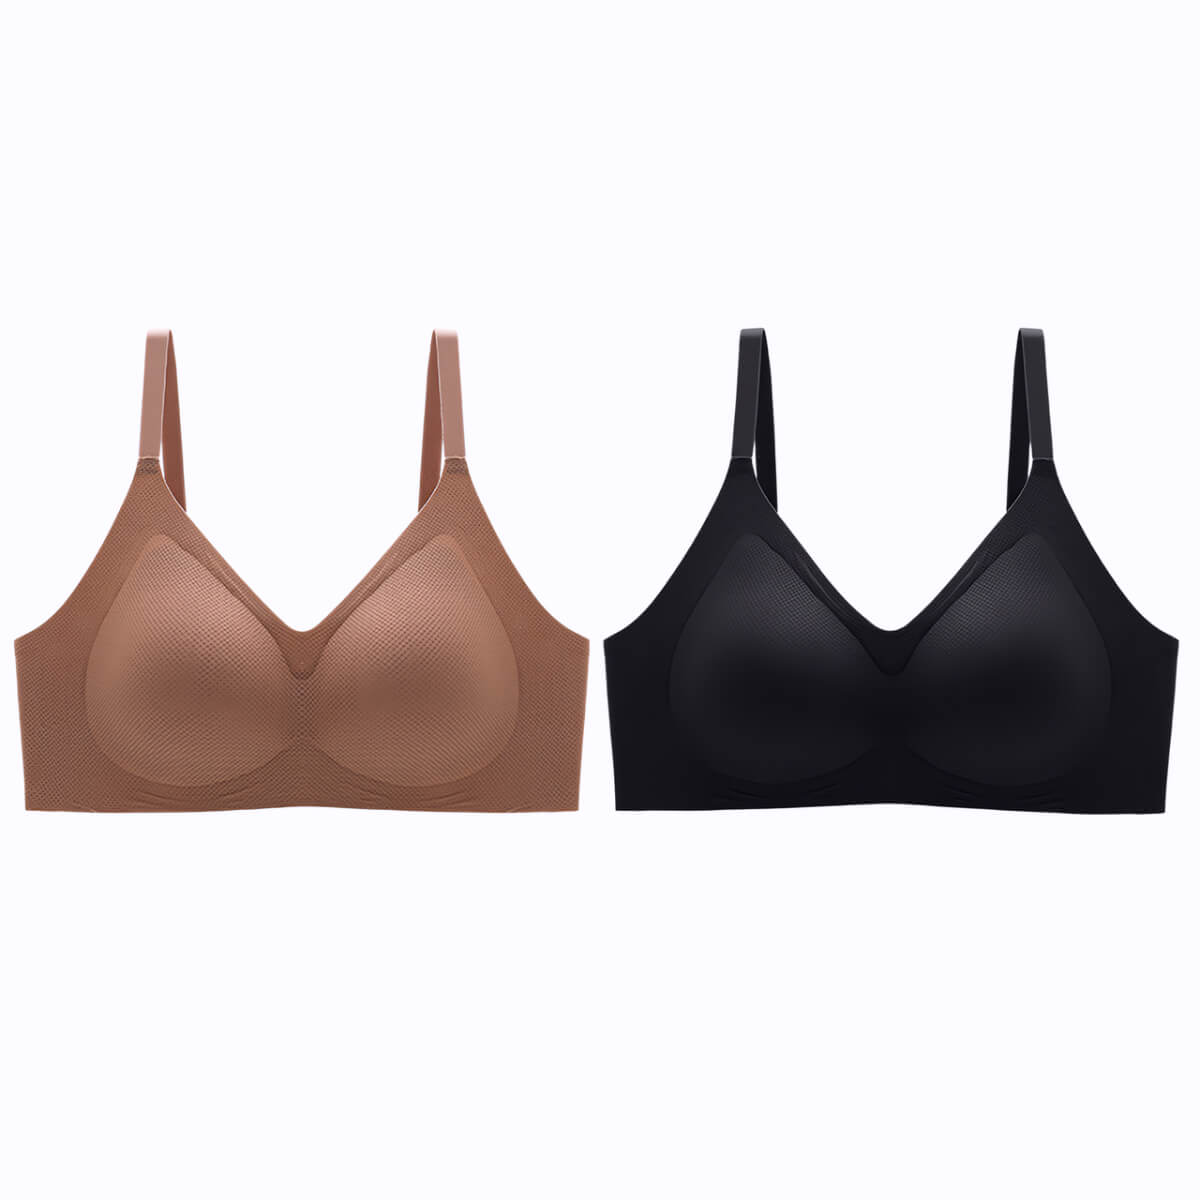 Shoppers Size 36DD Say This Bra Is Ideal for Those Who 'Struggle to Find  Good Support